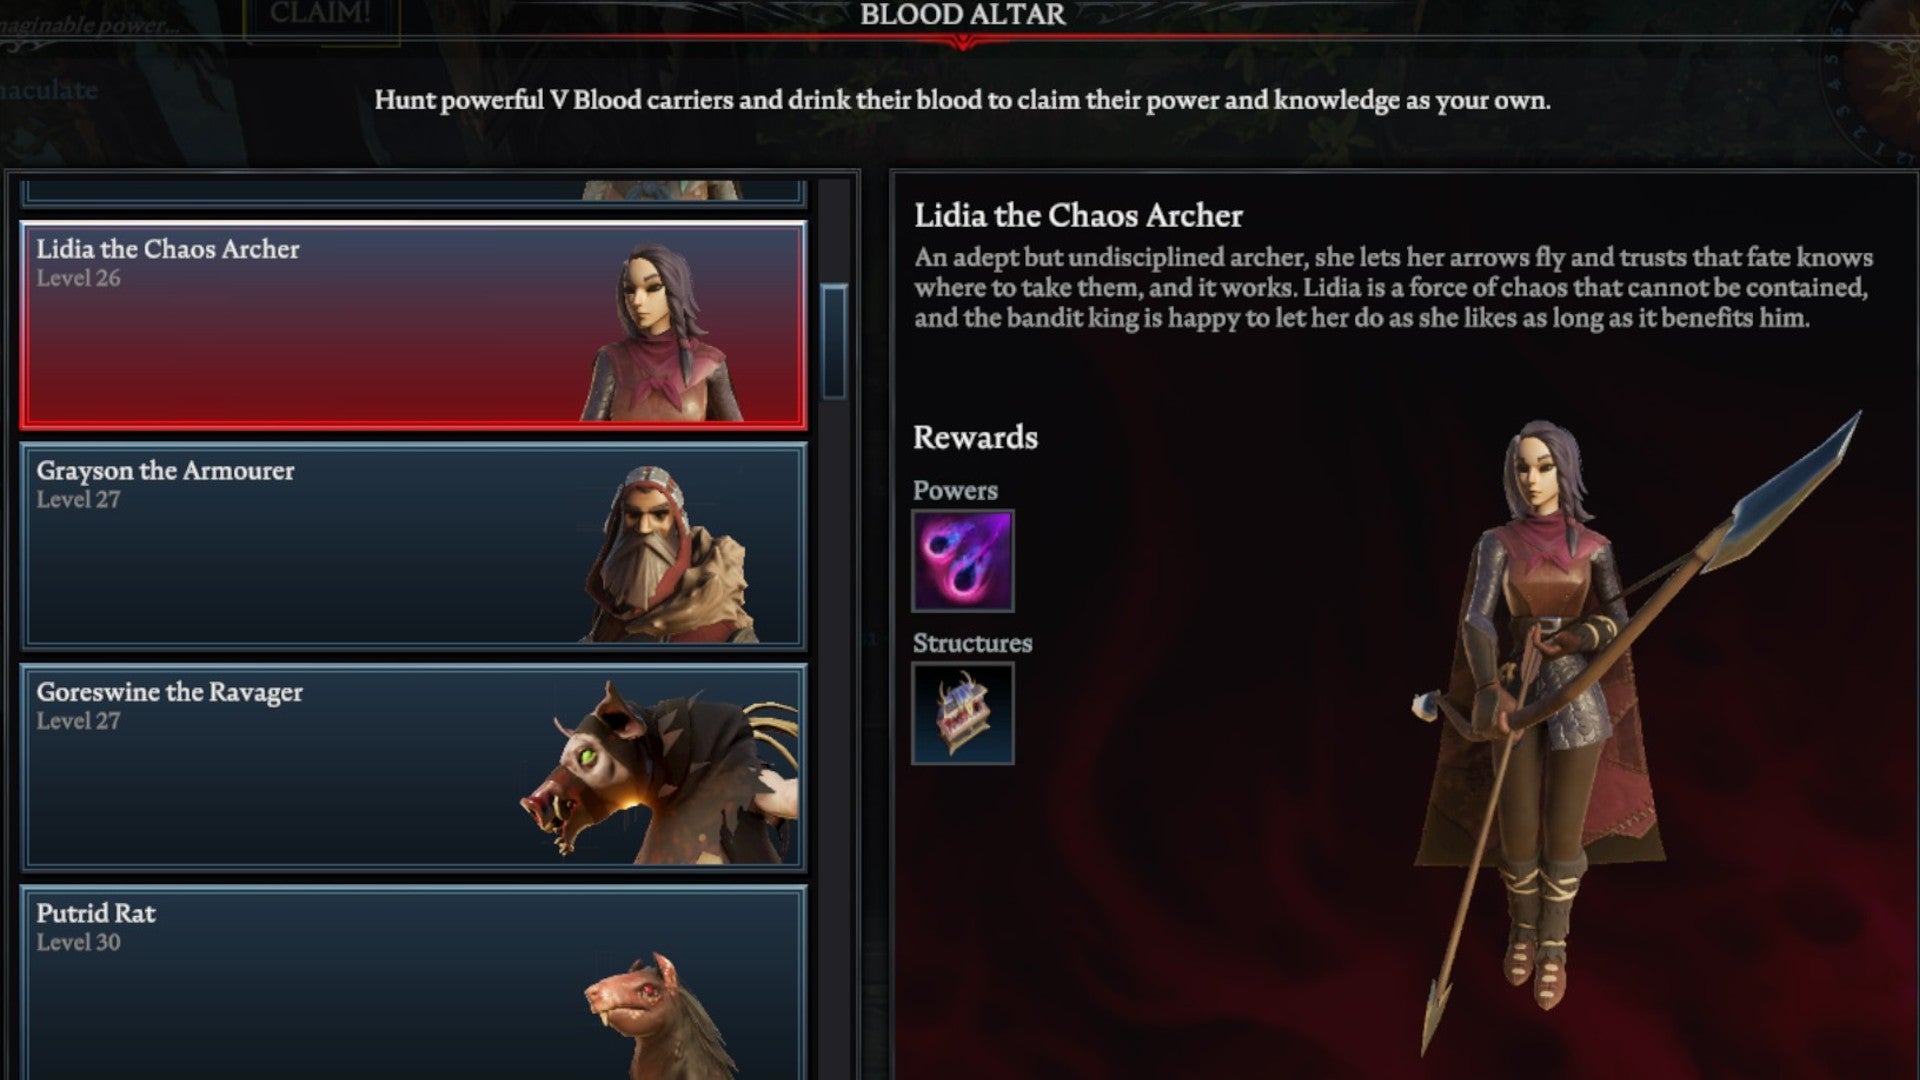 V Rising Lidia the Chaos Archer Blood Altar tracking page, showing an image of the chaos archer on the right and a list of bosses on the left